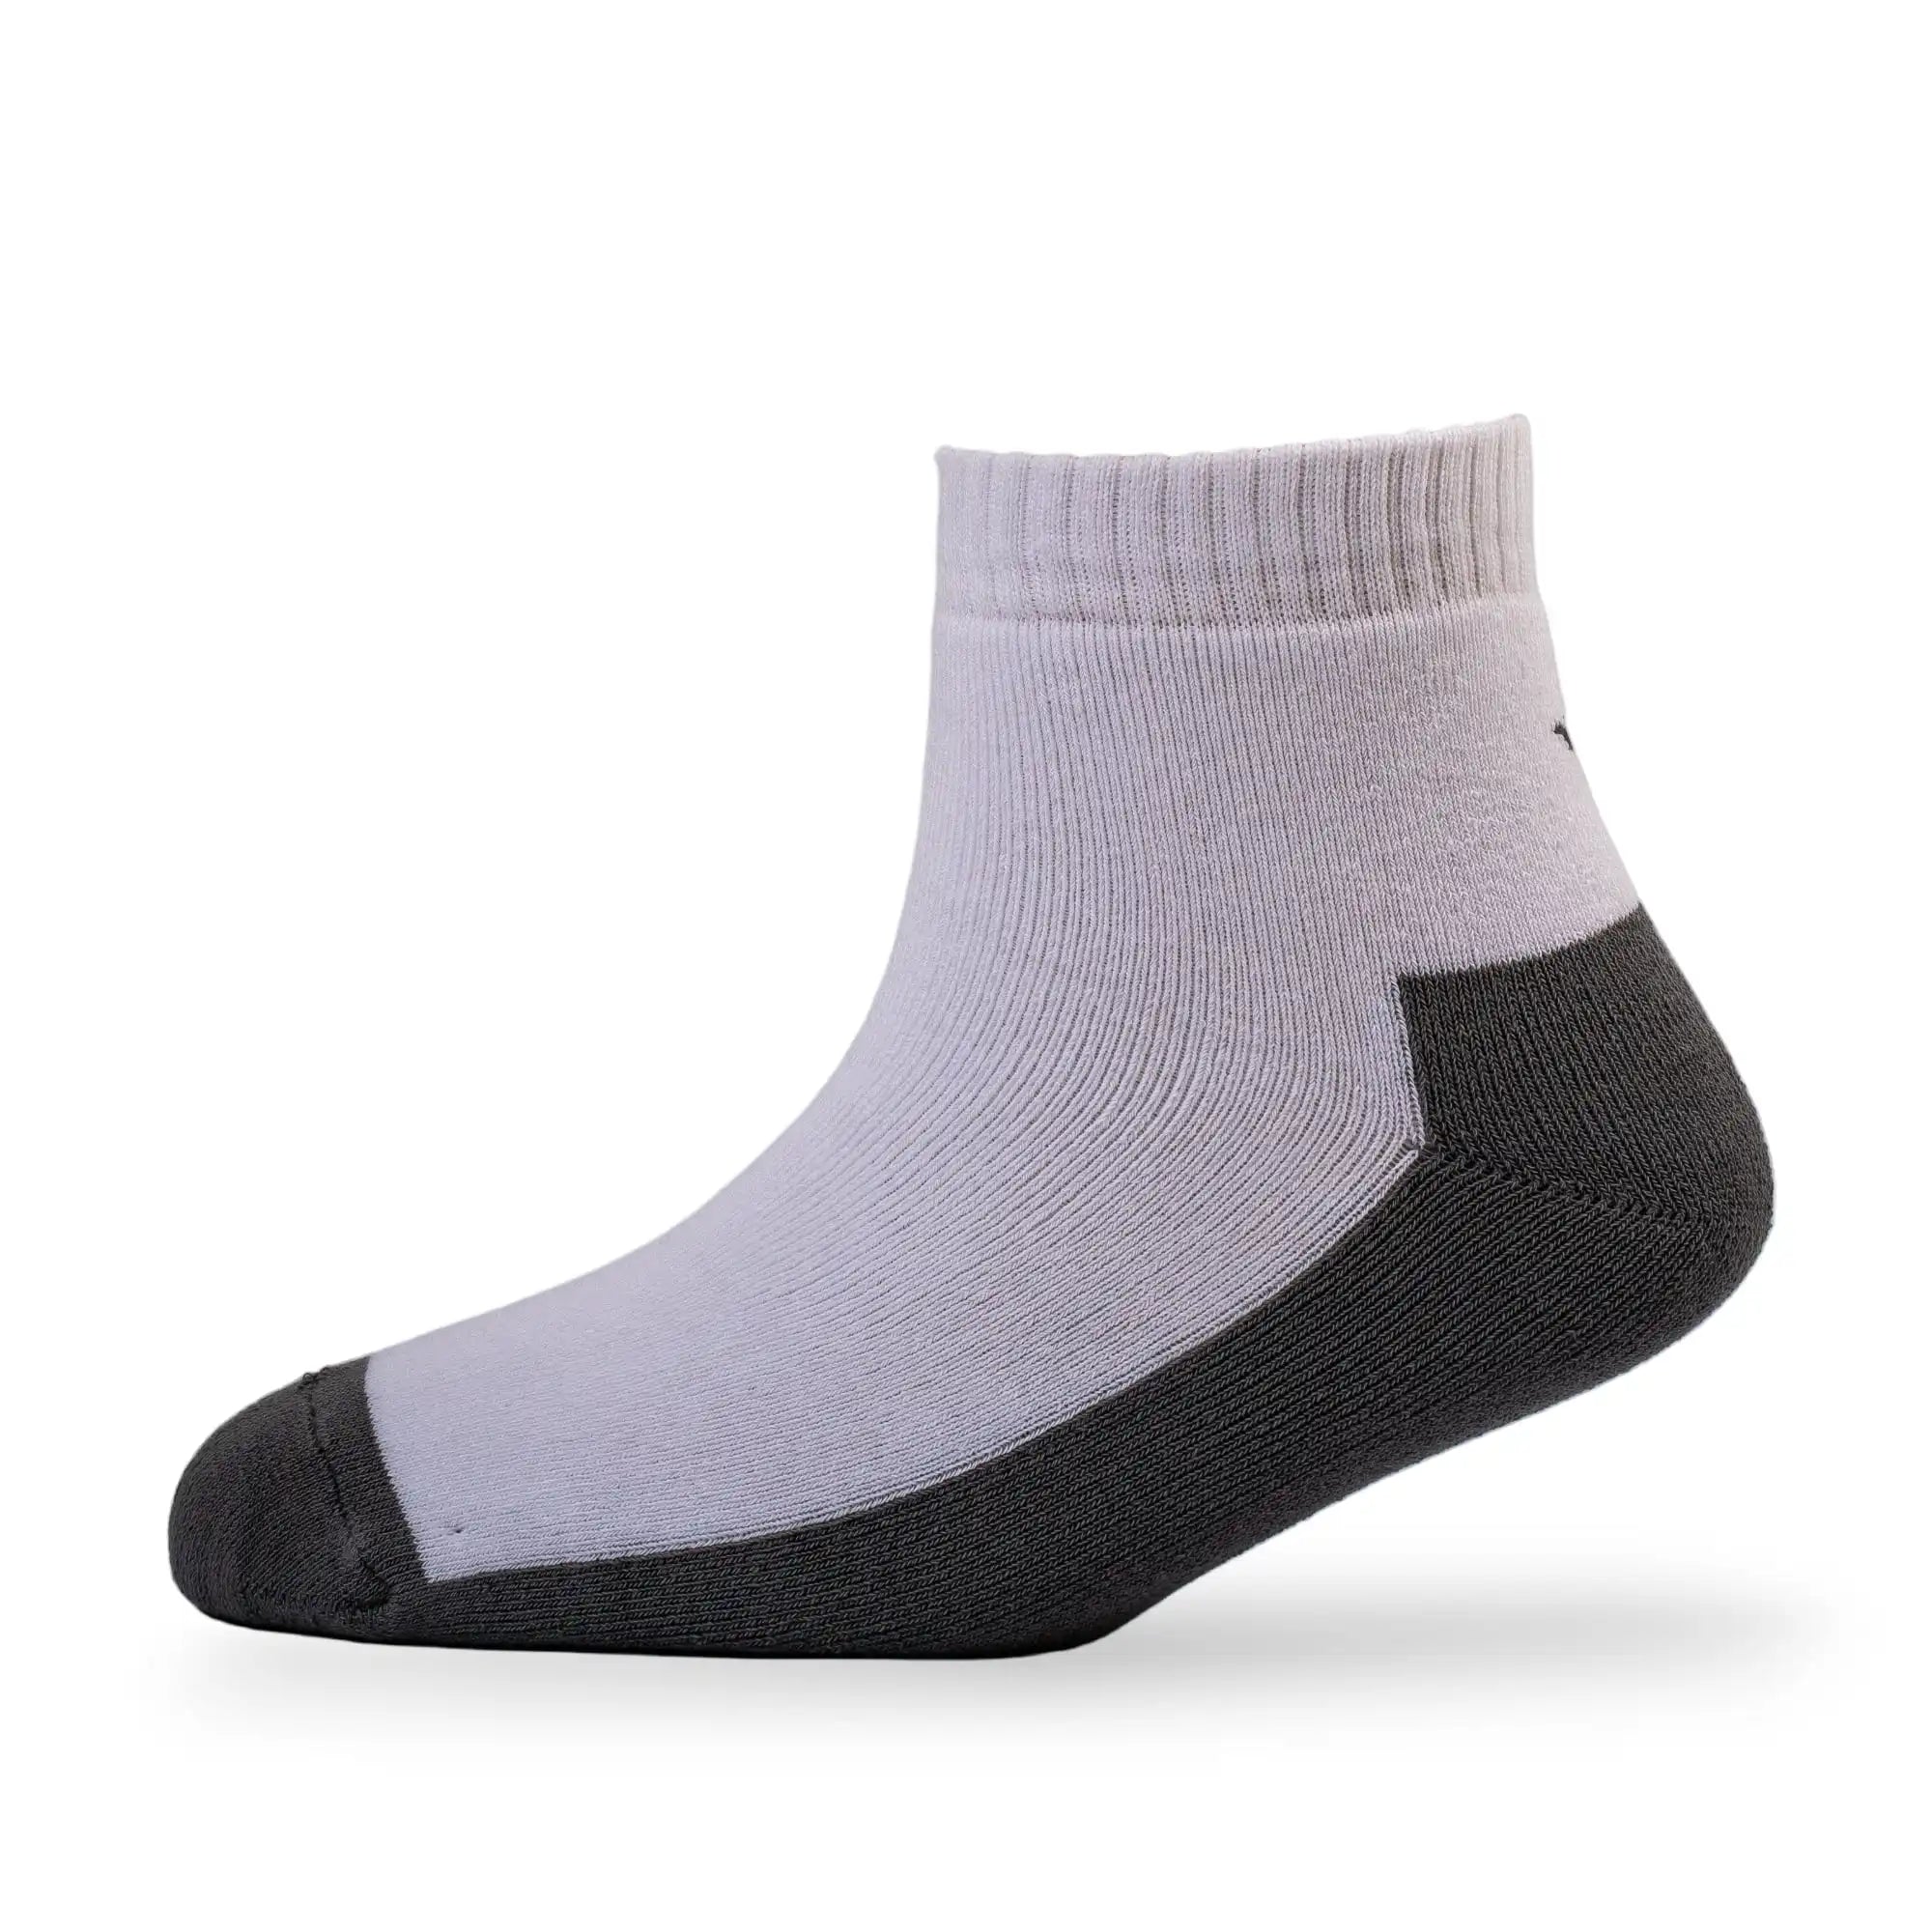 Young Wings Men's Multi Colour Cotton Fabric Design Ankle Length Socks - Pack of 3, Style no. M1-223 N